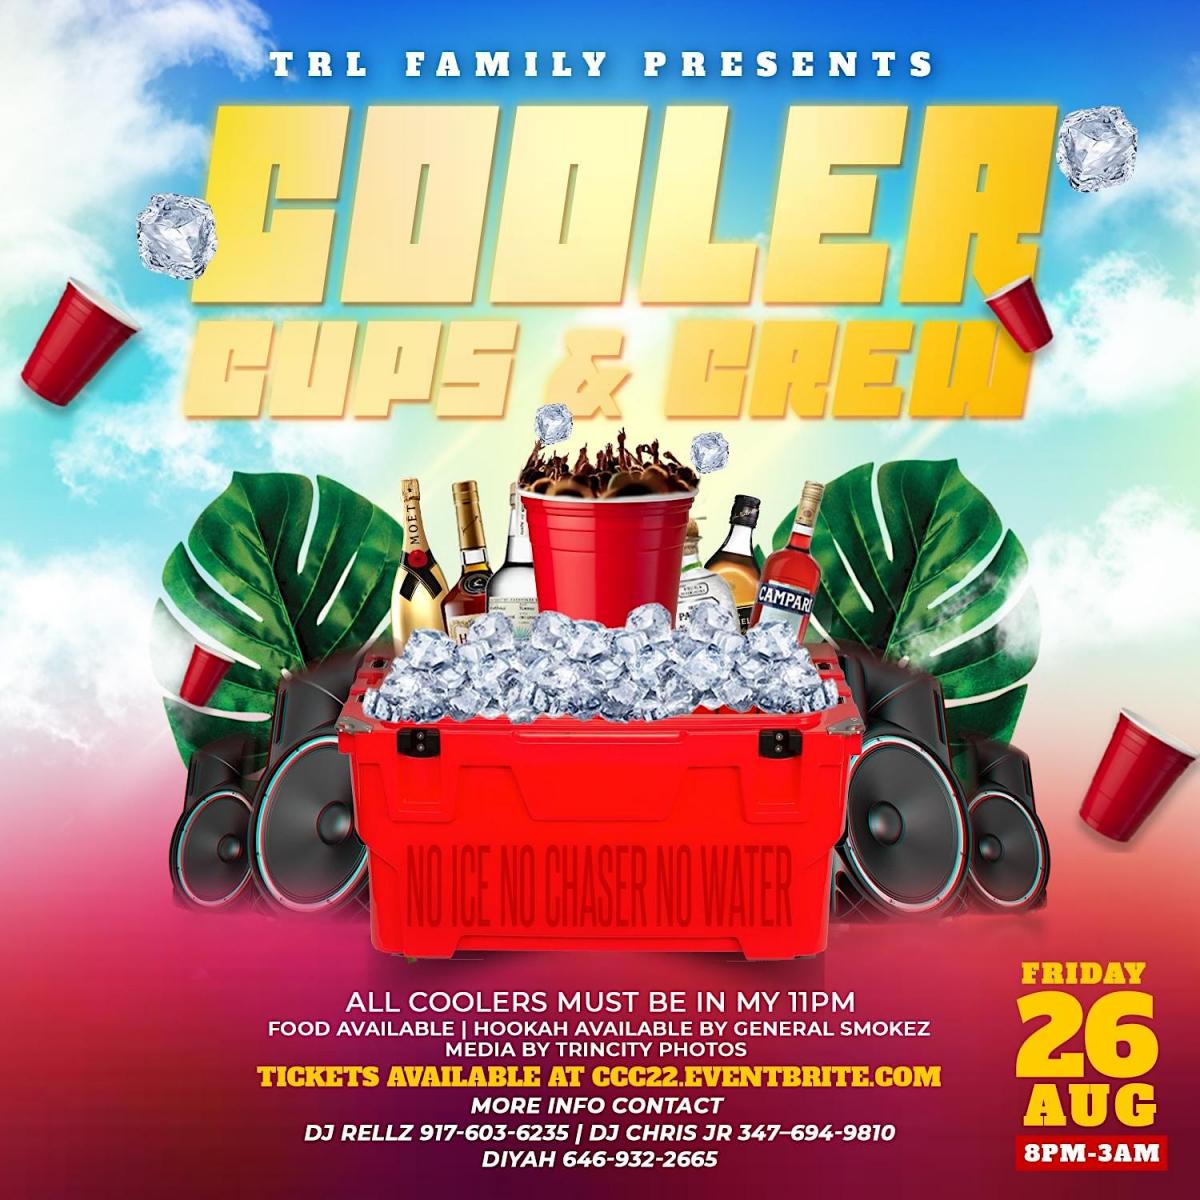 Cooler Cups and Crew flyer or graphic.